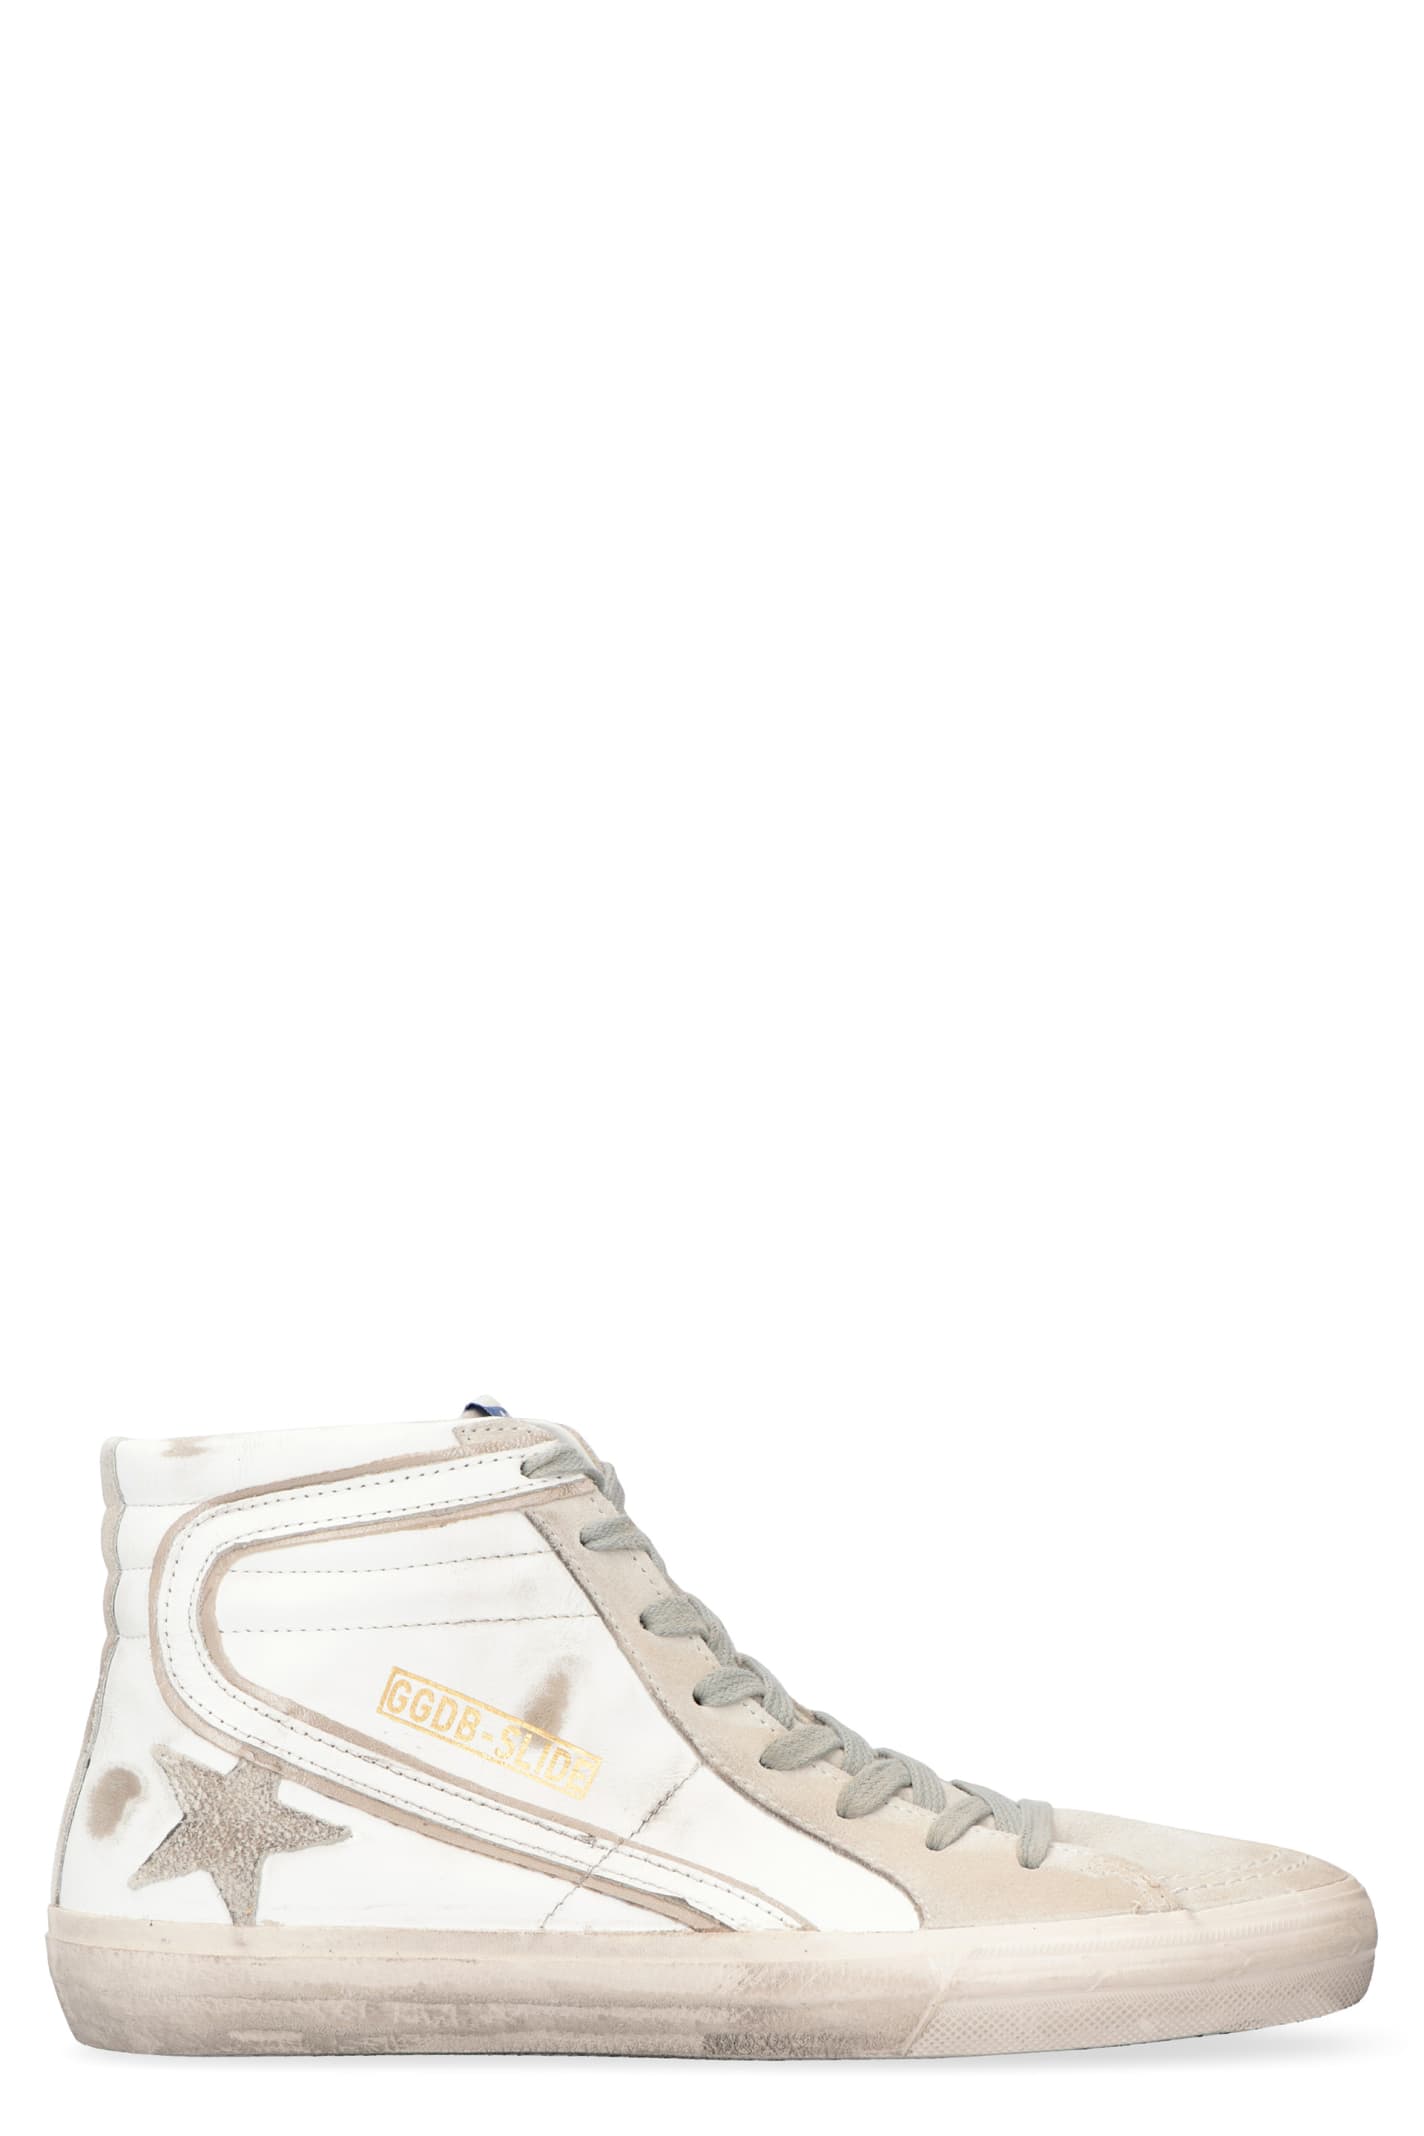 Golden Goose Side Classic Leather High-top Sneakers